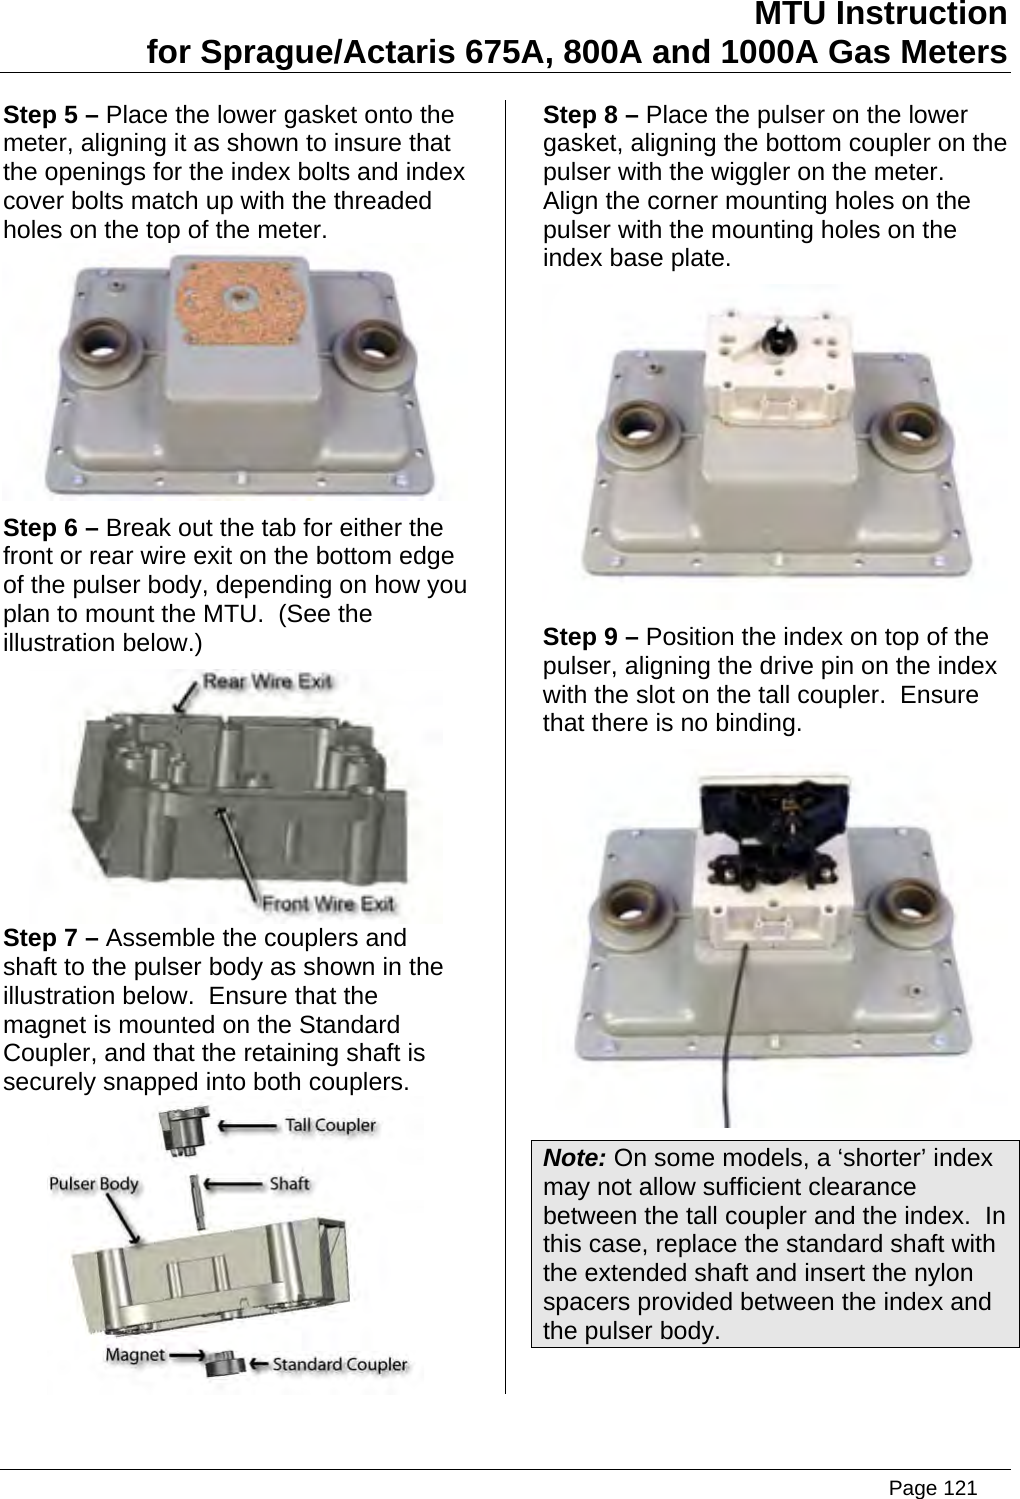 MTU Instruction for Sprague/Actaris 675A, 800A and 1000A Gas Meters Step 5 – Place the lower gasket onto the meter, aligning it as shown to insure that the openings for the index bolts and index cover bolts match up with the threaded holes on the top of the meter.  Step 6 – Break out the tab for either the front or rear wire exit on the bottom edge of the pulser body, depending on how you plan to mount the MTU.  (See the illustration below.)  Step 7 – Assemble the couplers and shaft to the pulser body as shown in the illustration below.  Ensure that the magnet is mounted on the Standard Coupler, and that the retaining shaft is securely snapped into both couplers.  Step 8 – Place the pulser on the lower gasket, aligning the bottom coupler on the pulser with the wiggler on the meter.  Align the corner mounting holes on the pulser with the mounting holes on the index base plate.  Step 9 – Position the index on top of the pulser, aligning the drive pin on the index with the slot on the tall coupler.  Ensure that there is no binding.  Note: On some models, a ‘shorter’ index may not allow sufficient clearance between the tall coupler and the index.  In this case, replace the standard shaft with the extended shaft and insert the nylon spacers provided between the index and the pulser body.   Page 121